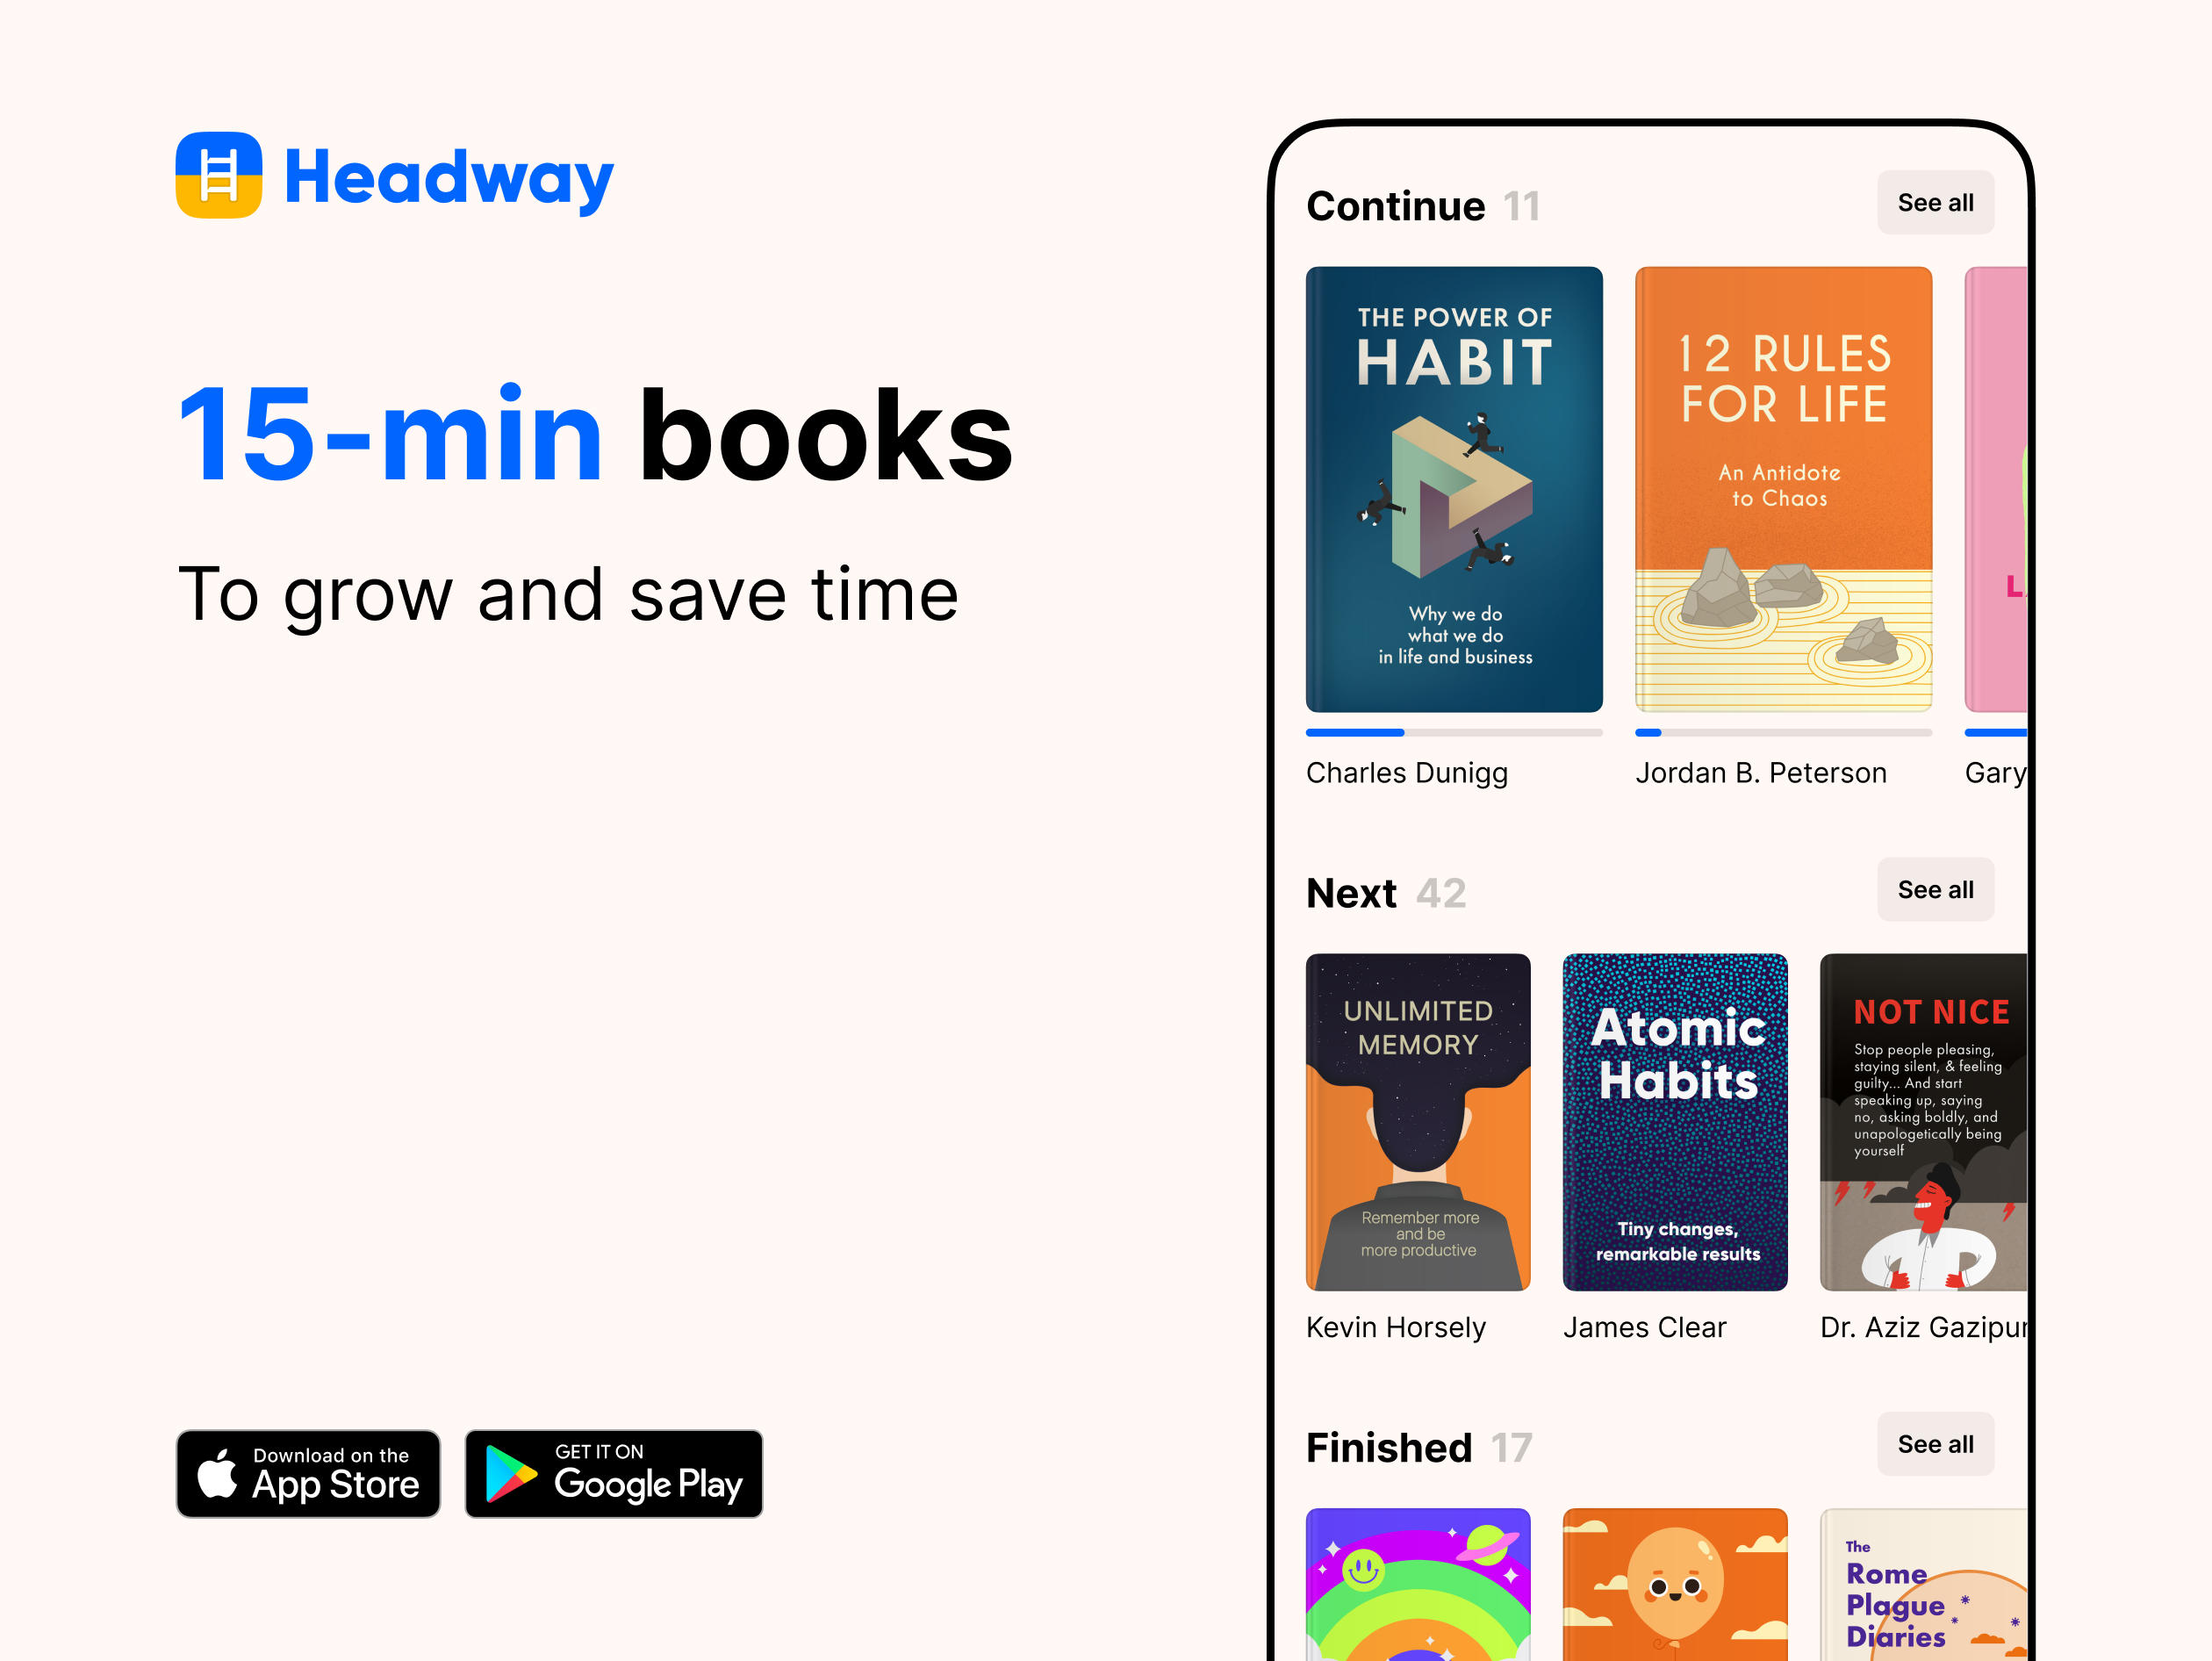 15-min books to grow and save time